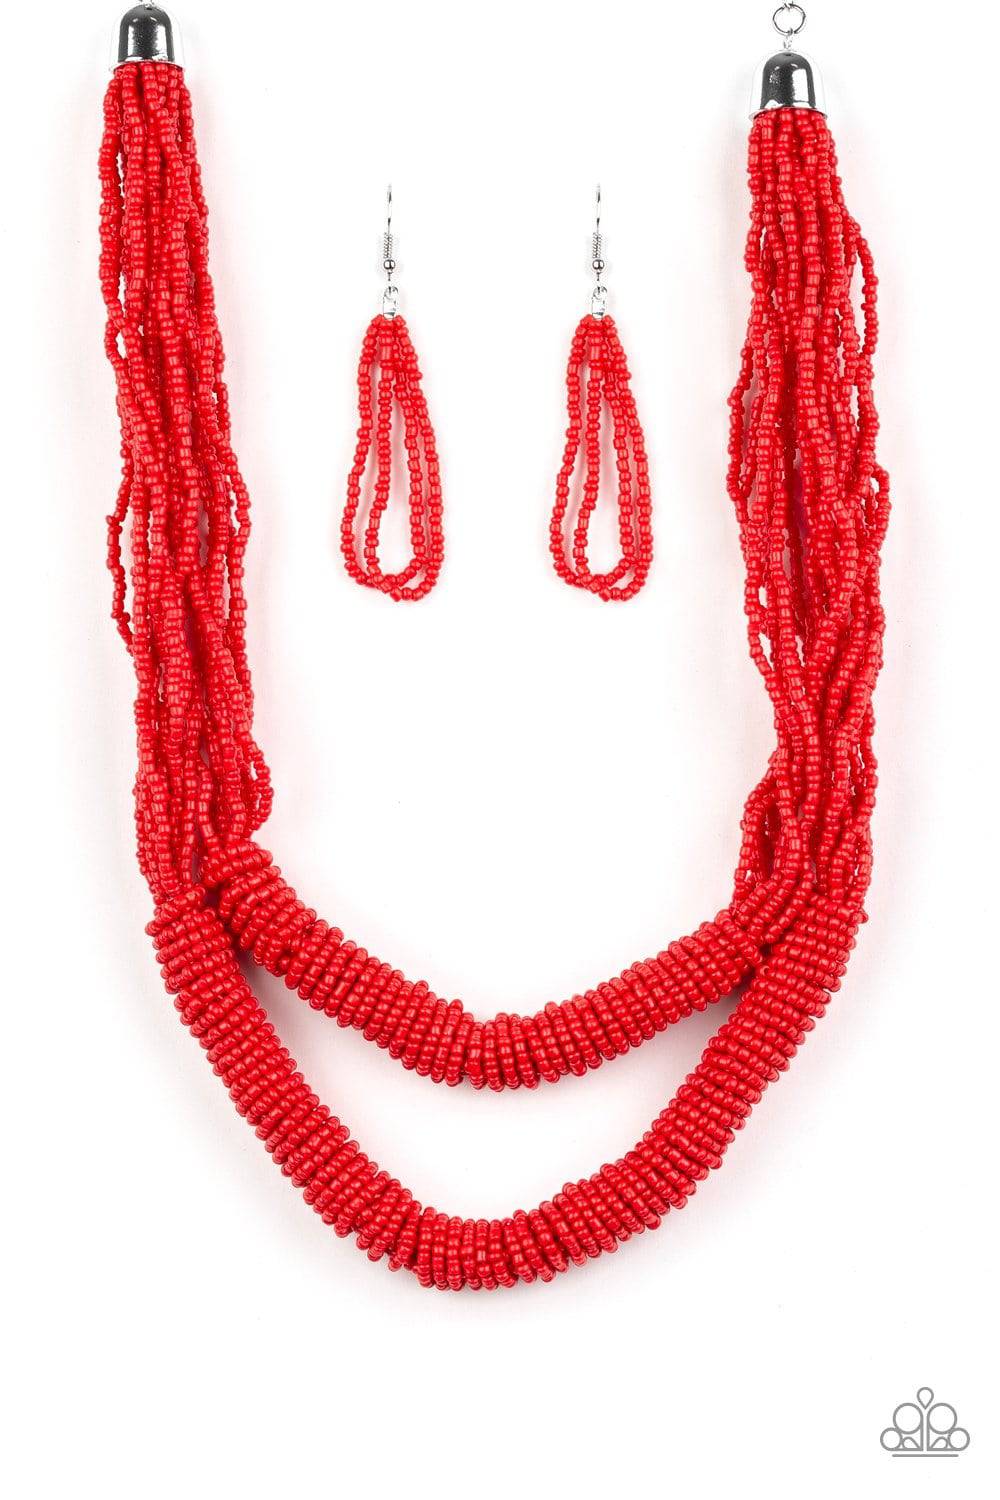 Right As RAINFOREST - Red Seed Bead Necklace - Paparazzi Accessories - GlaMarous Titi Jewels